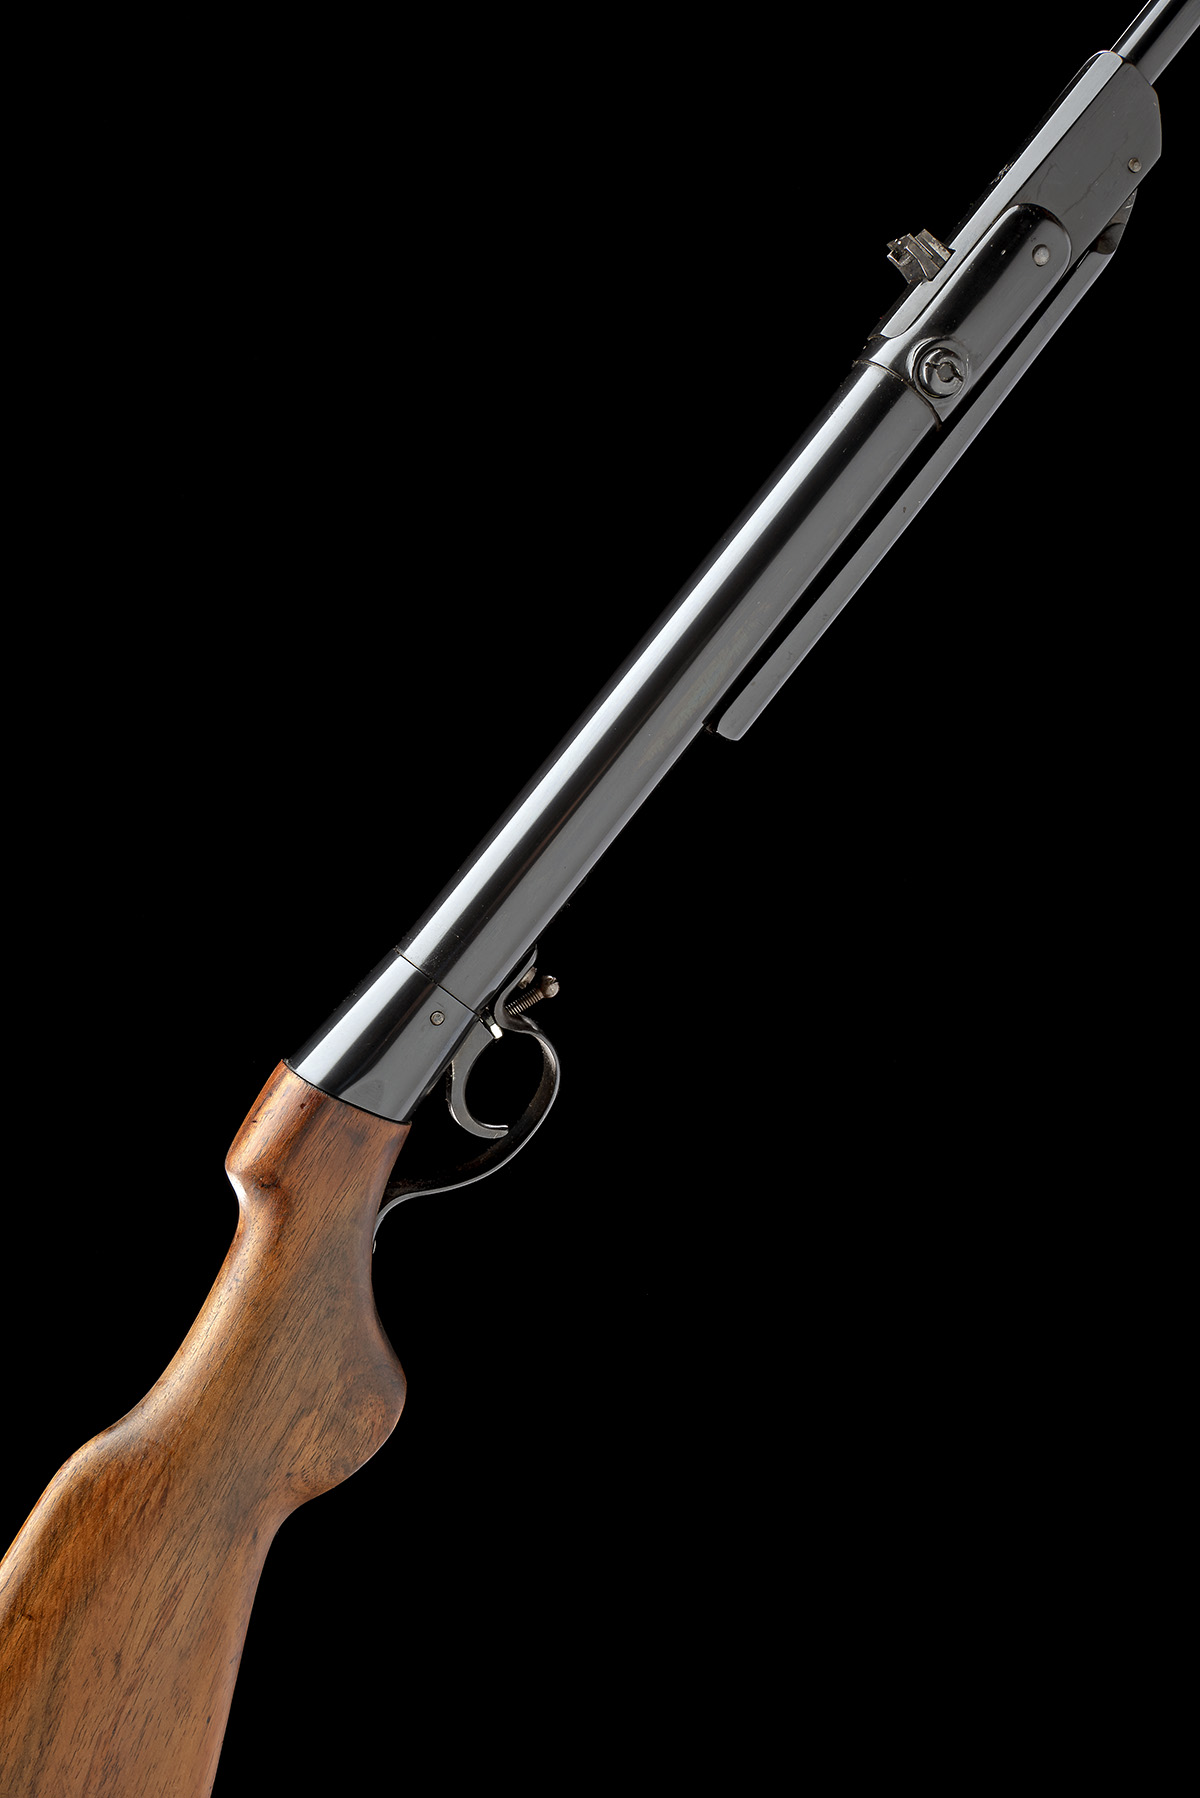 AN UNUSUAL .177 CAM-ACTION BREAK-BARREL GREENER VARIANT AIR-RIFLE, UNSIGNED, no visible serial